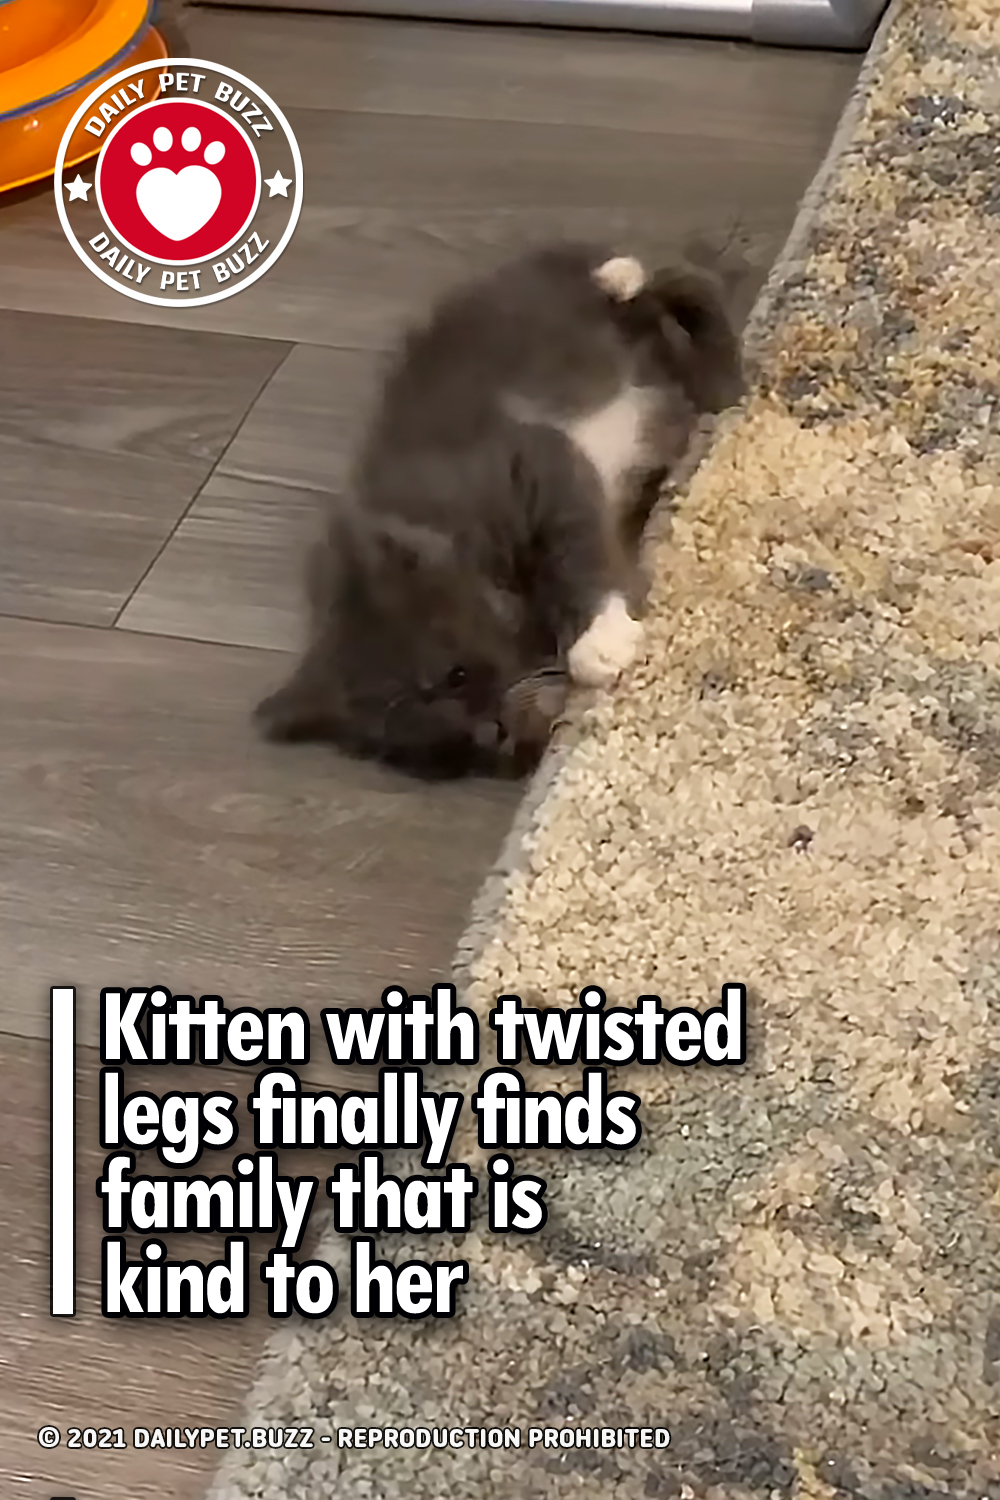 Kitten with twisted legs finally finds family that is kind to her